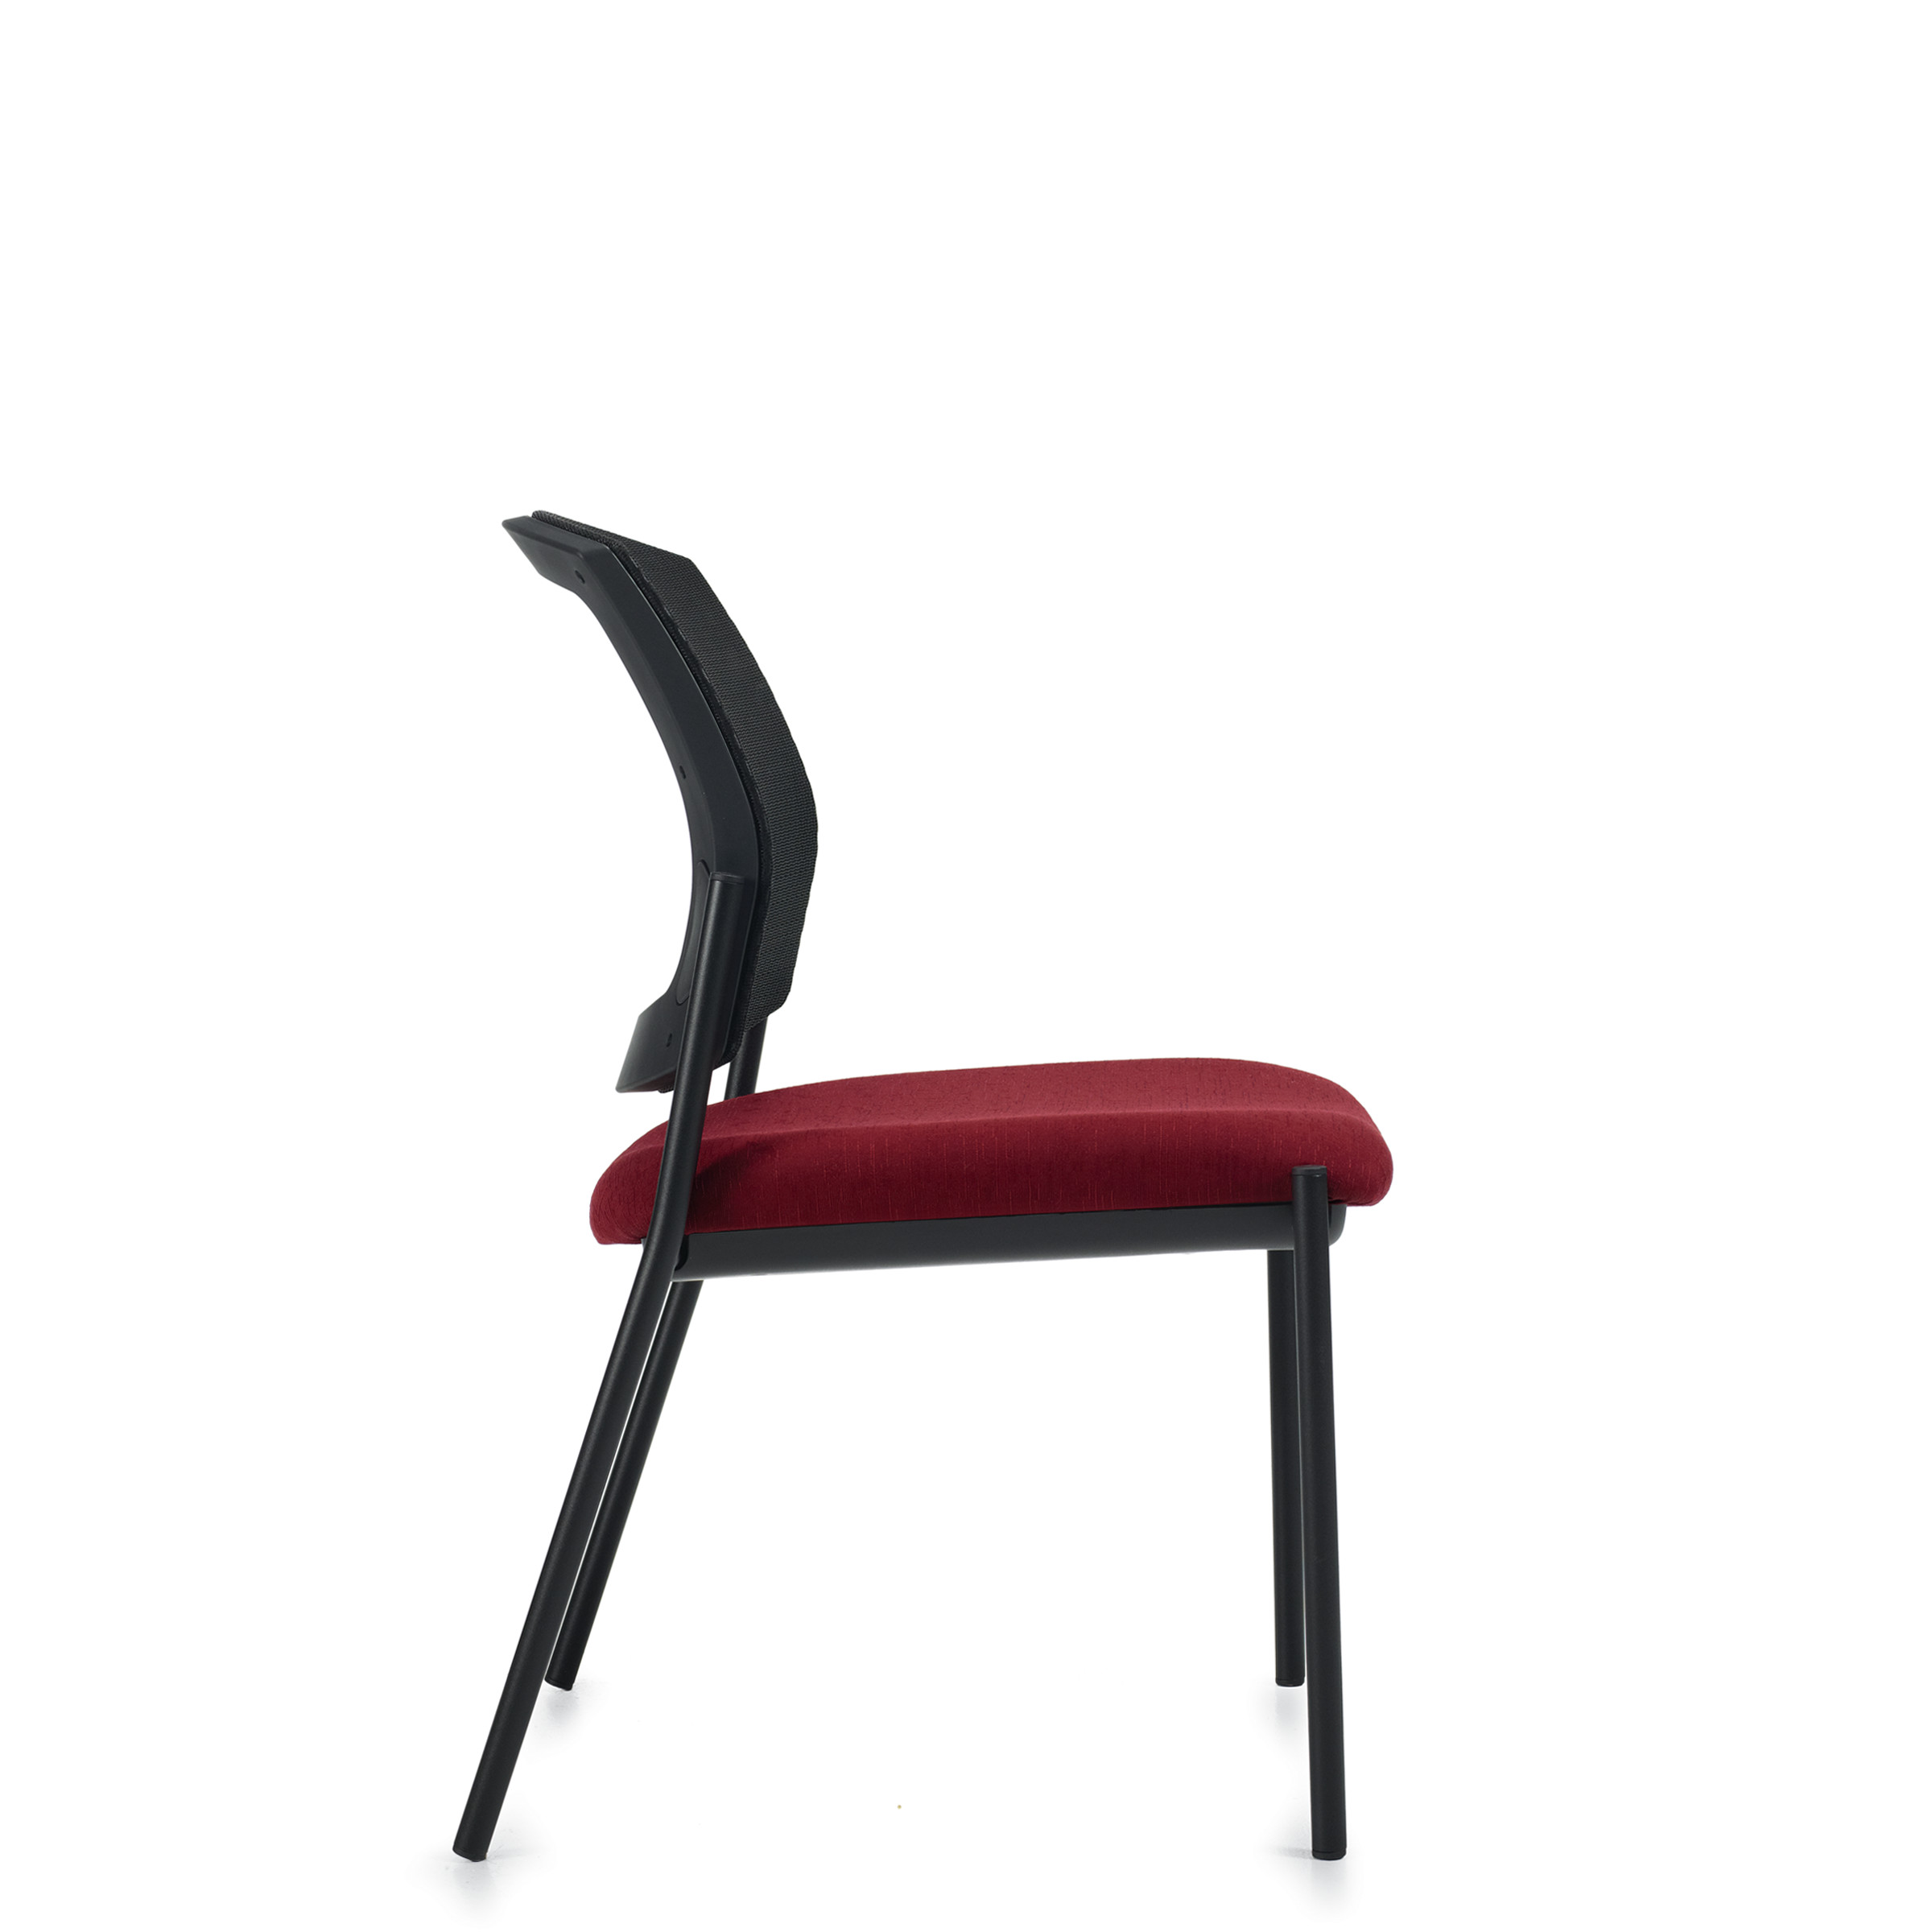 Ibex | Upholstered Seat & Mesh Back Armless Guest Chair